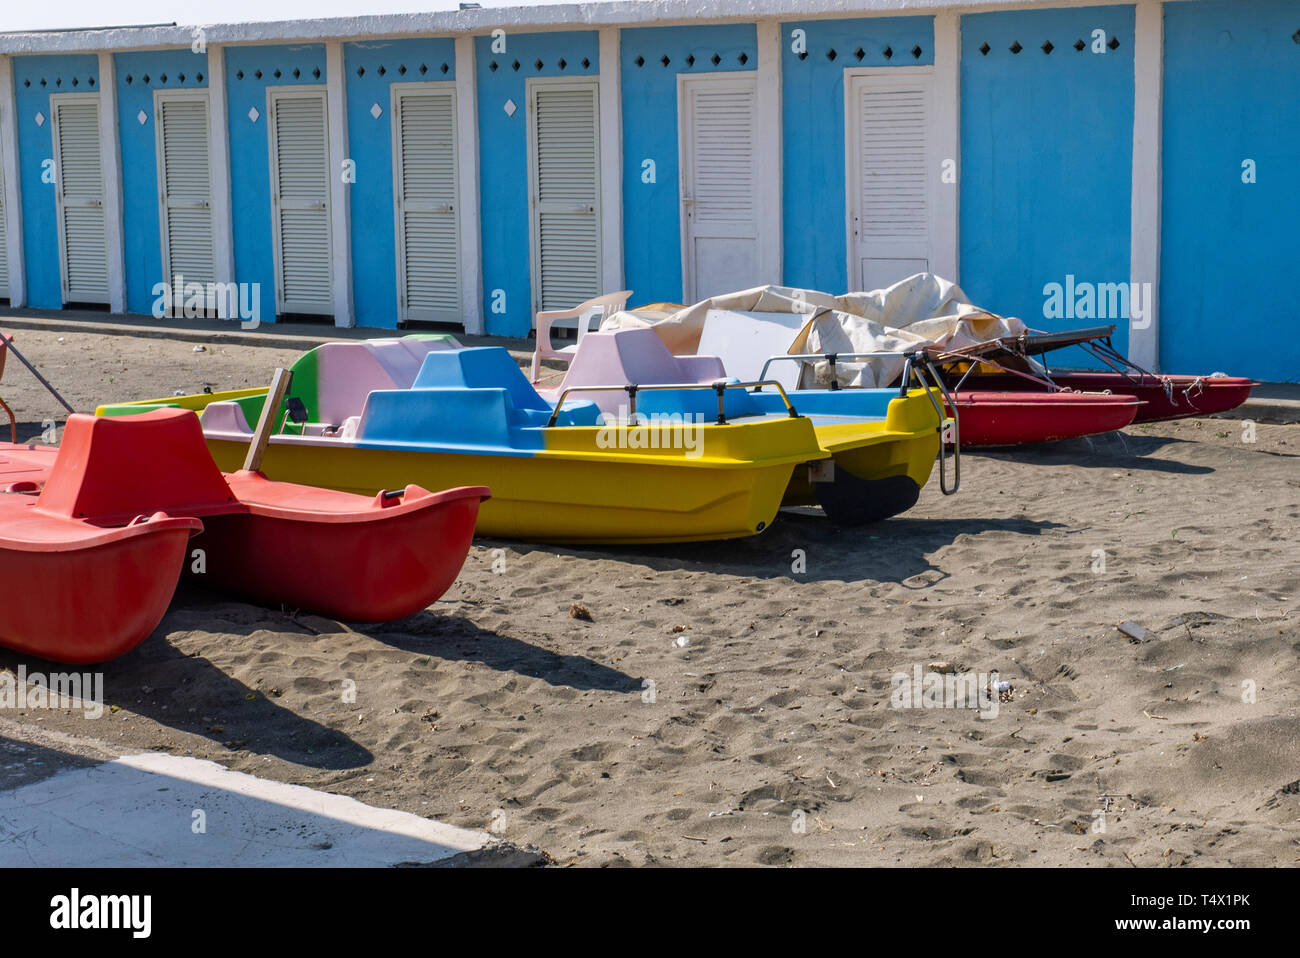 colorful boats on the sandy beach of a beach establishment, with white cabins in the background Stock Photo